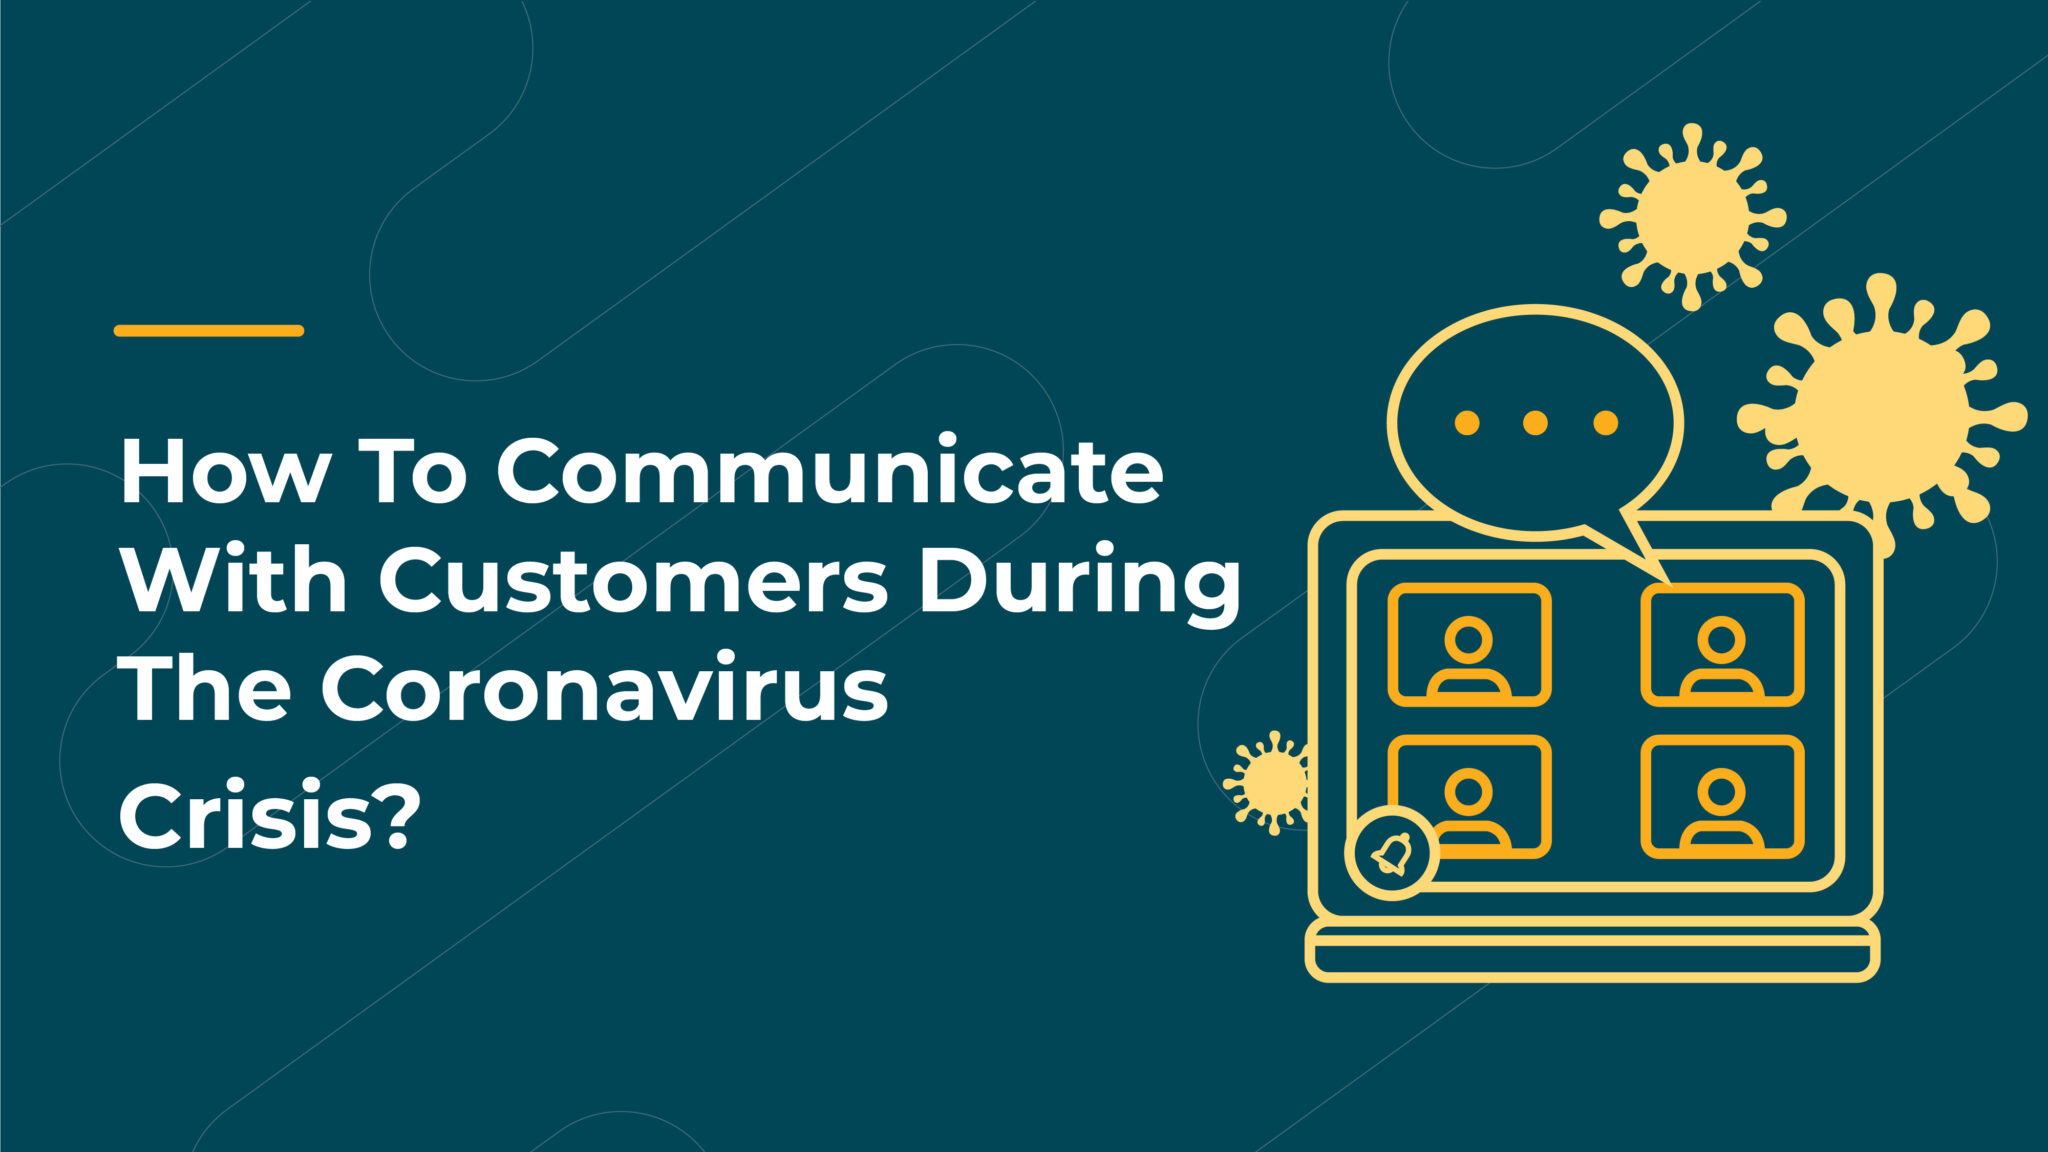 How to communicate with customers during the coronavirus crisis